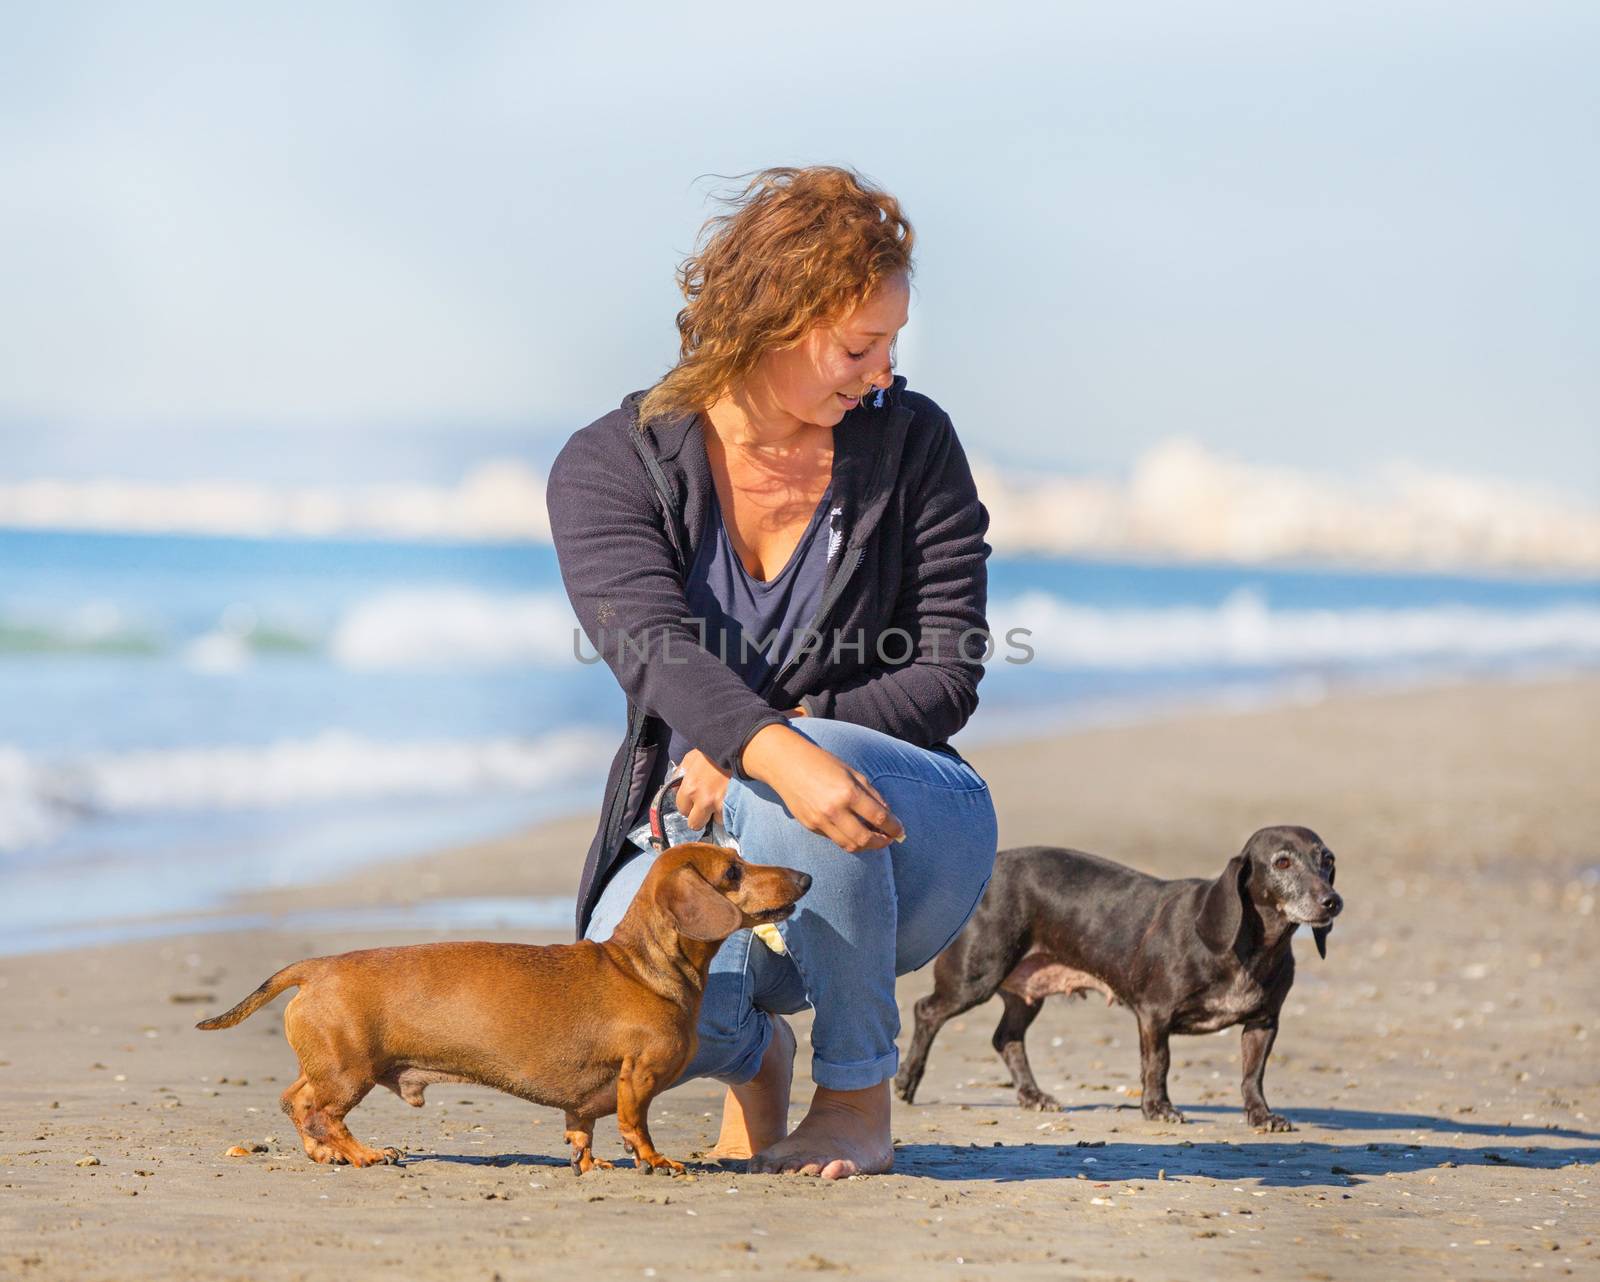 dogs and woman on the beach by cynoclub